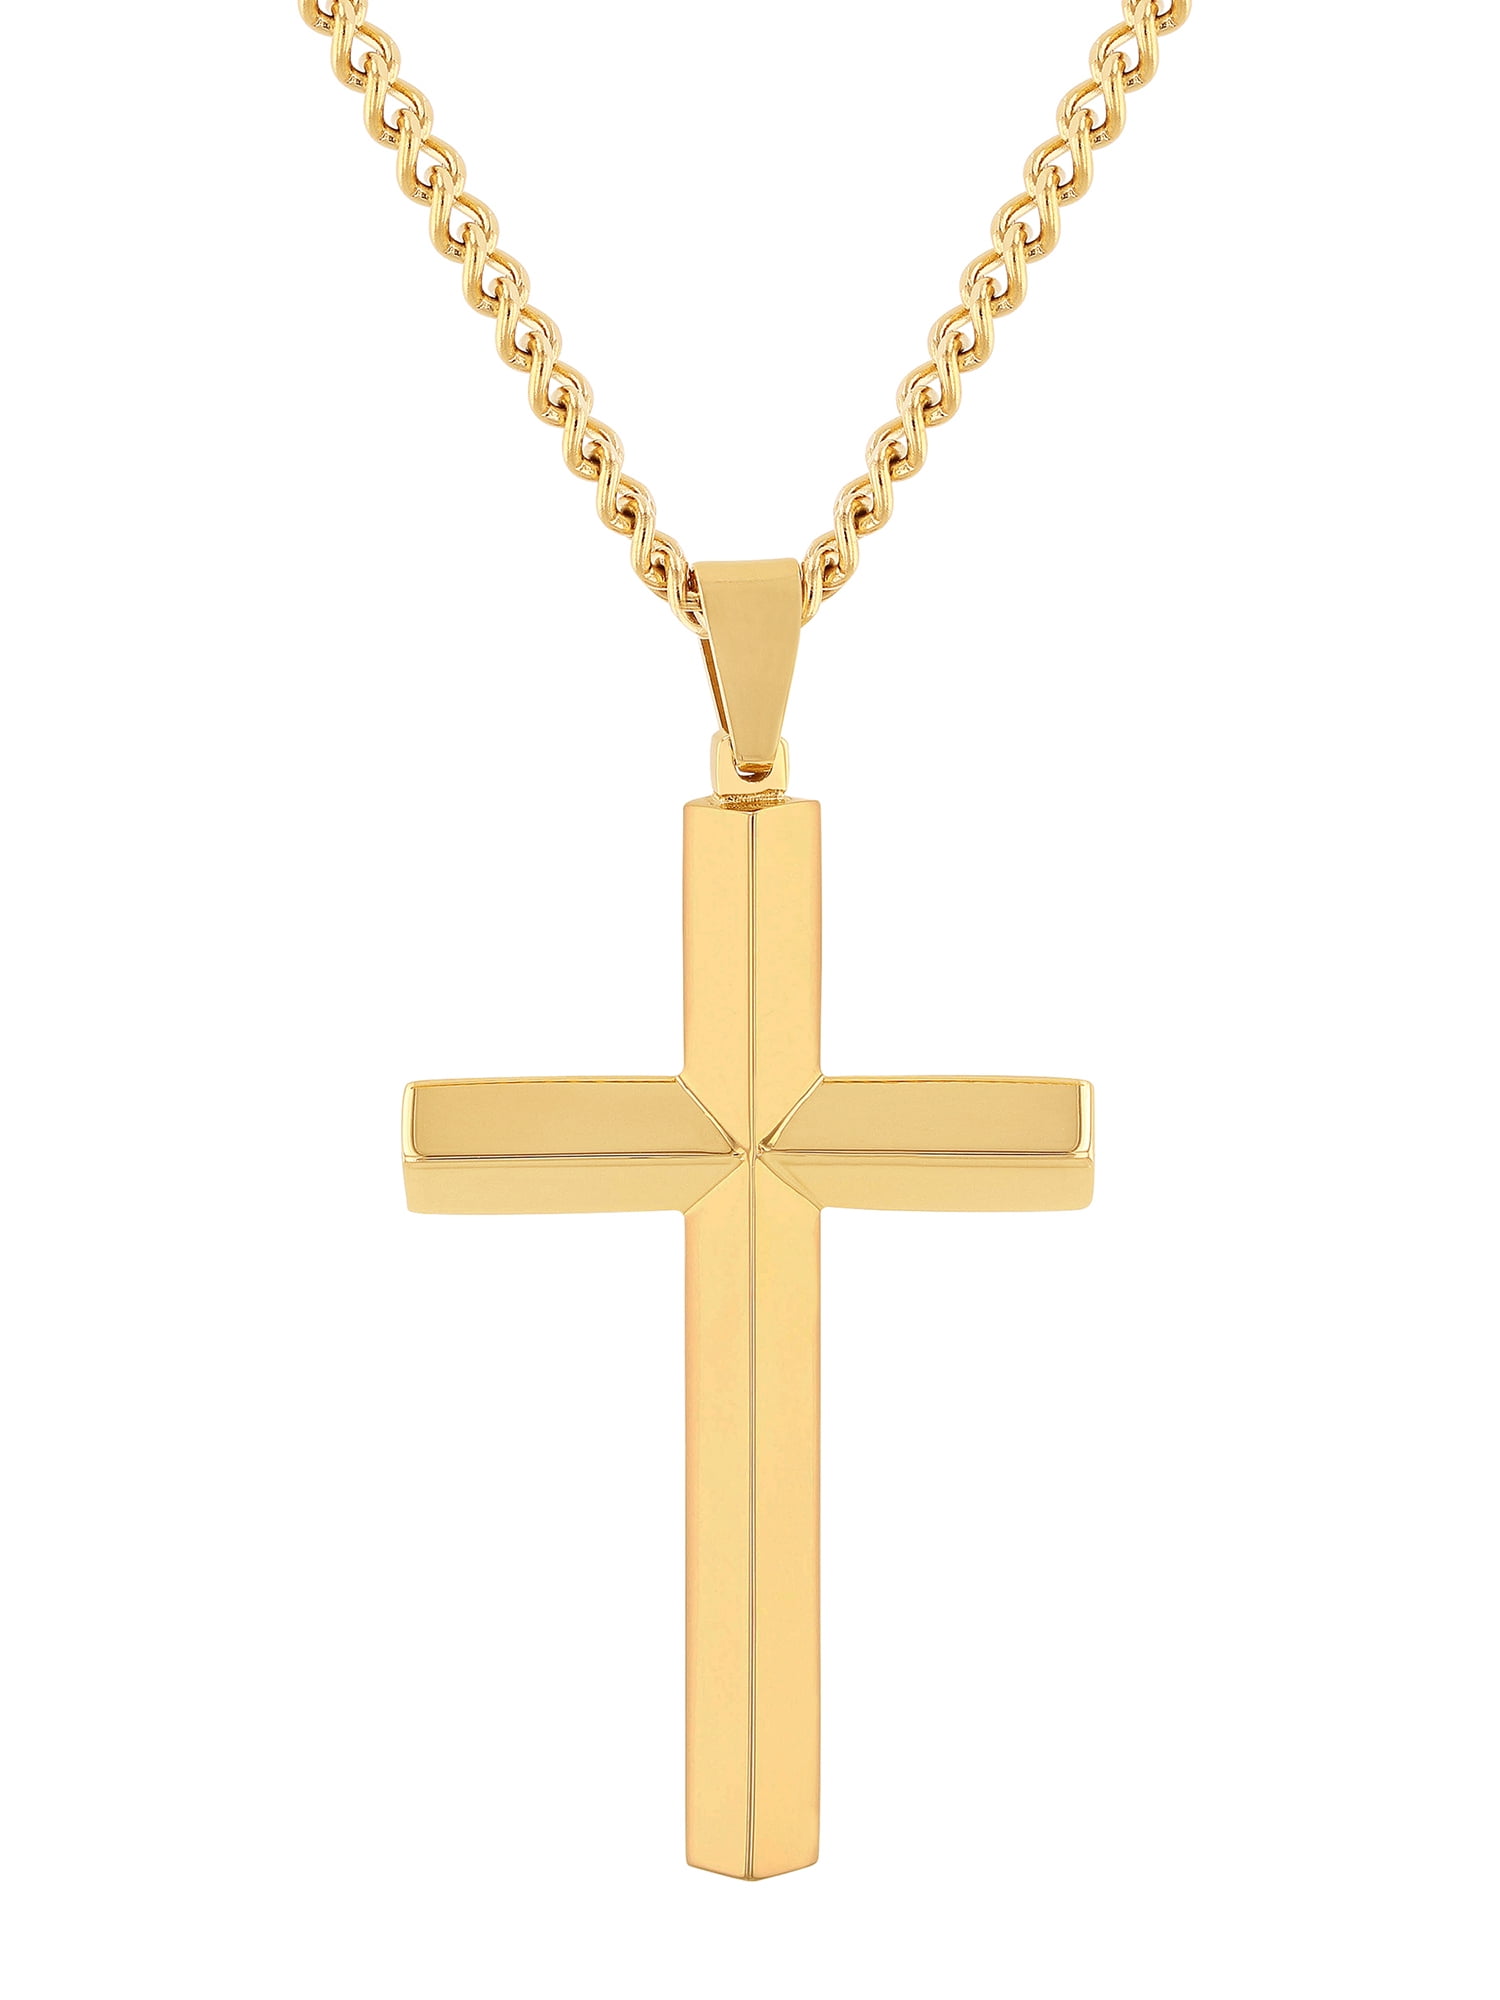 Believe by Brilliance Mens Gold-Tone Stainless Steel Skinny Cross Pendant Necklace